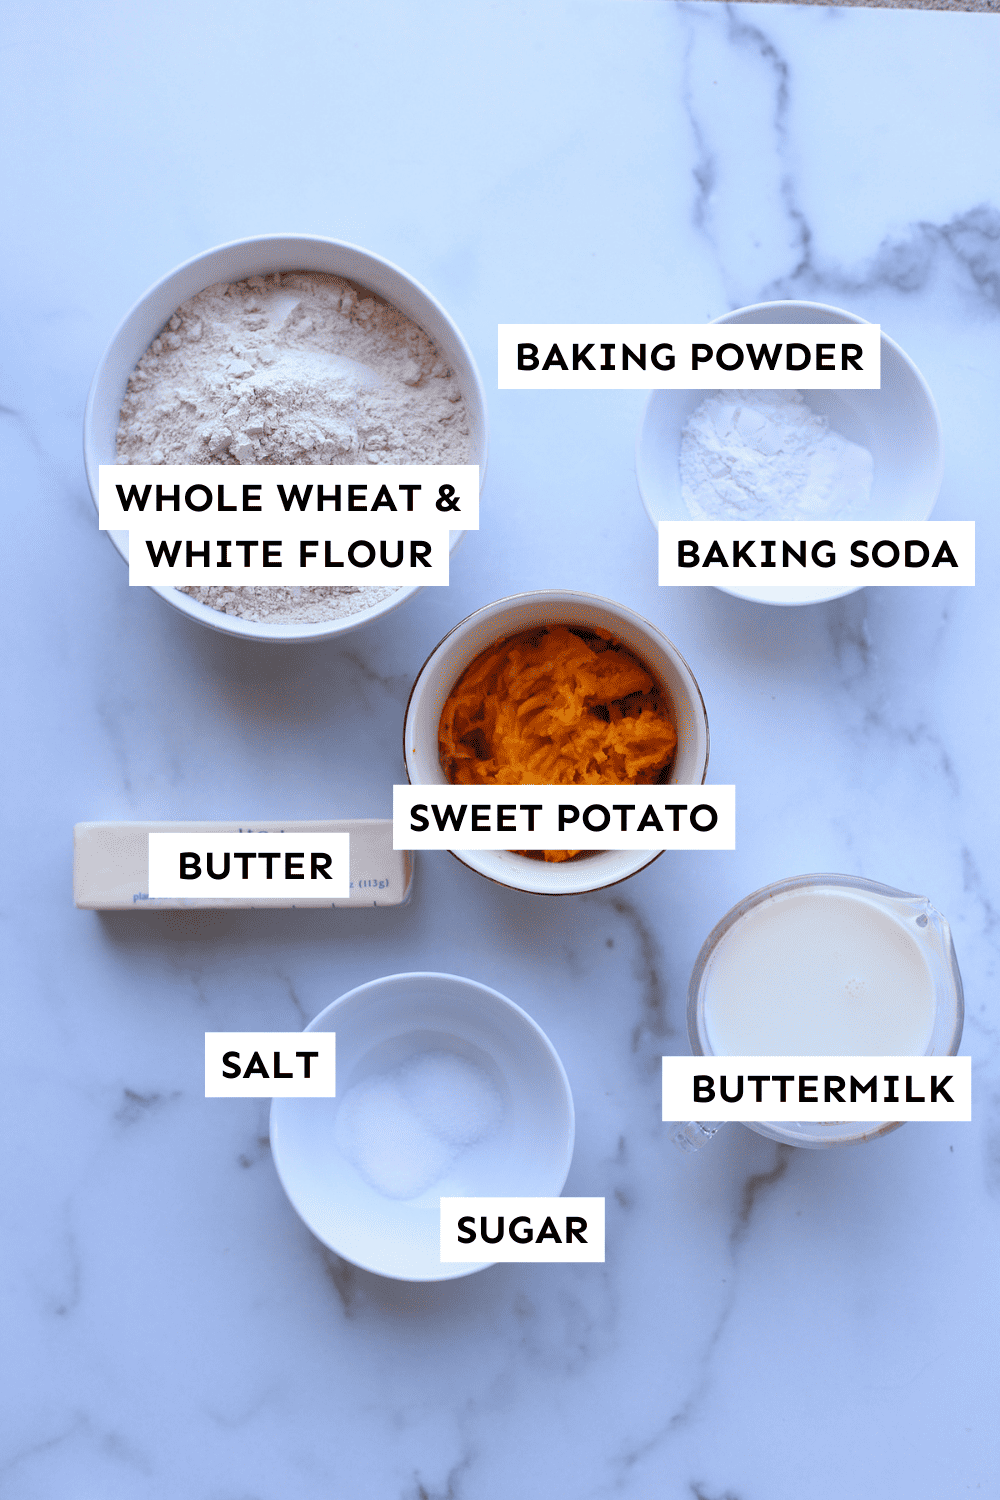 Ingredients for sweet potato biscuits measured in bowls and labeled.